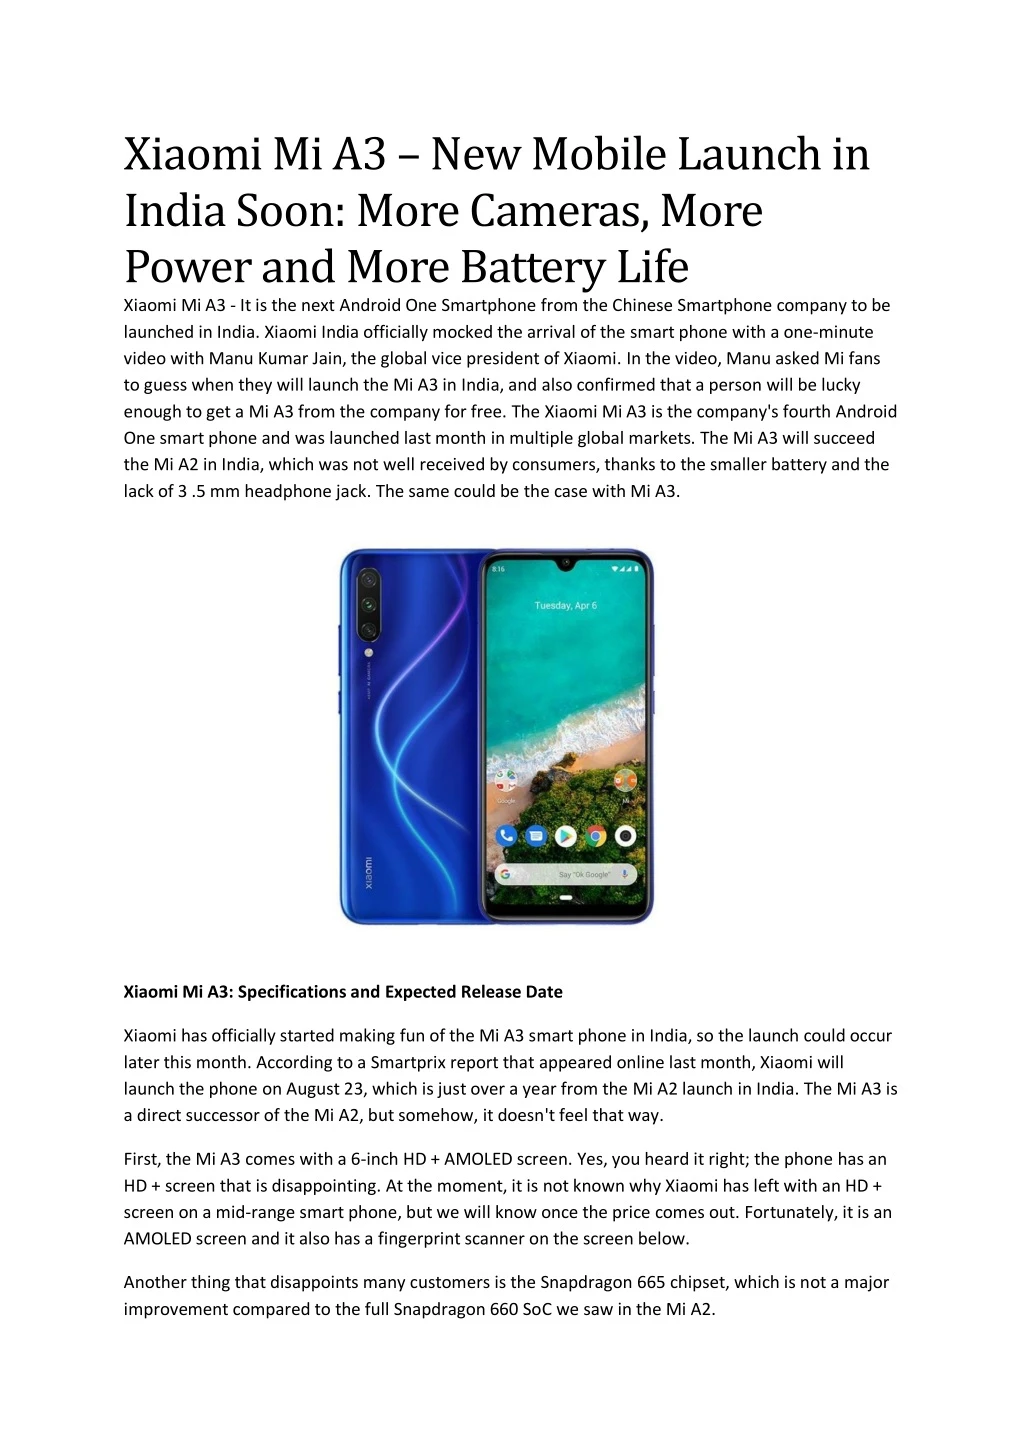 xiaomi mi a3 new mobile launch in india soon more